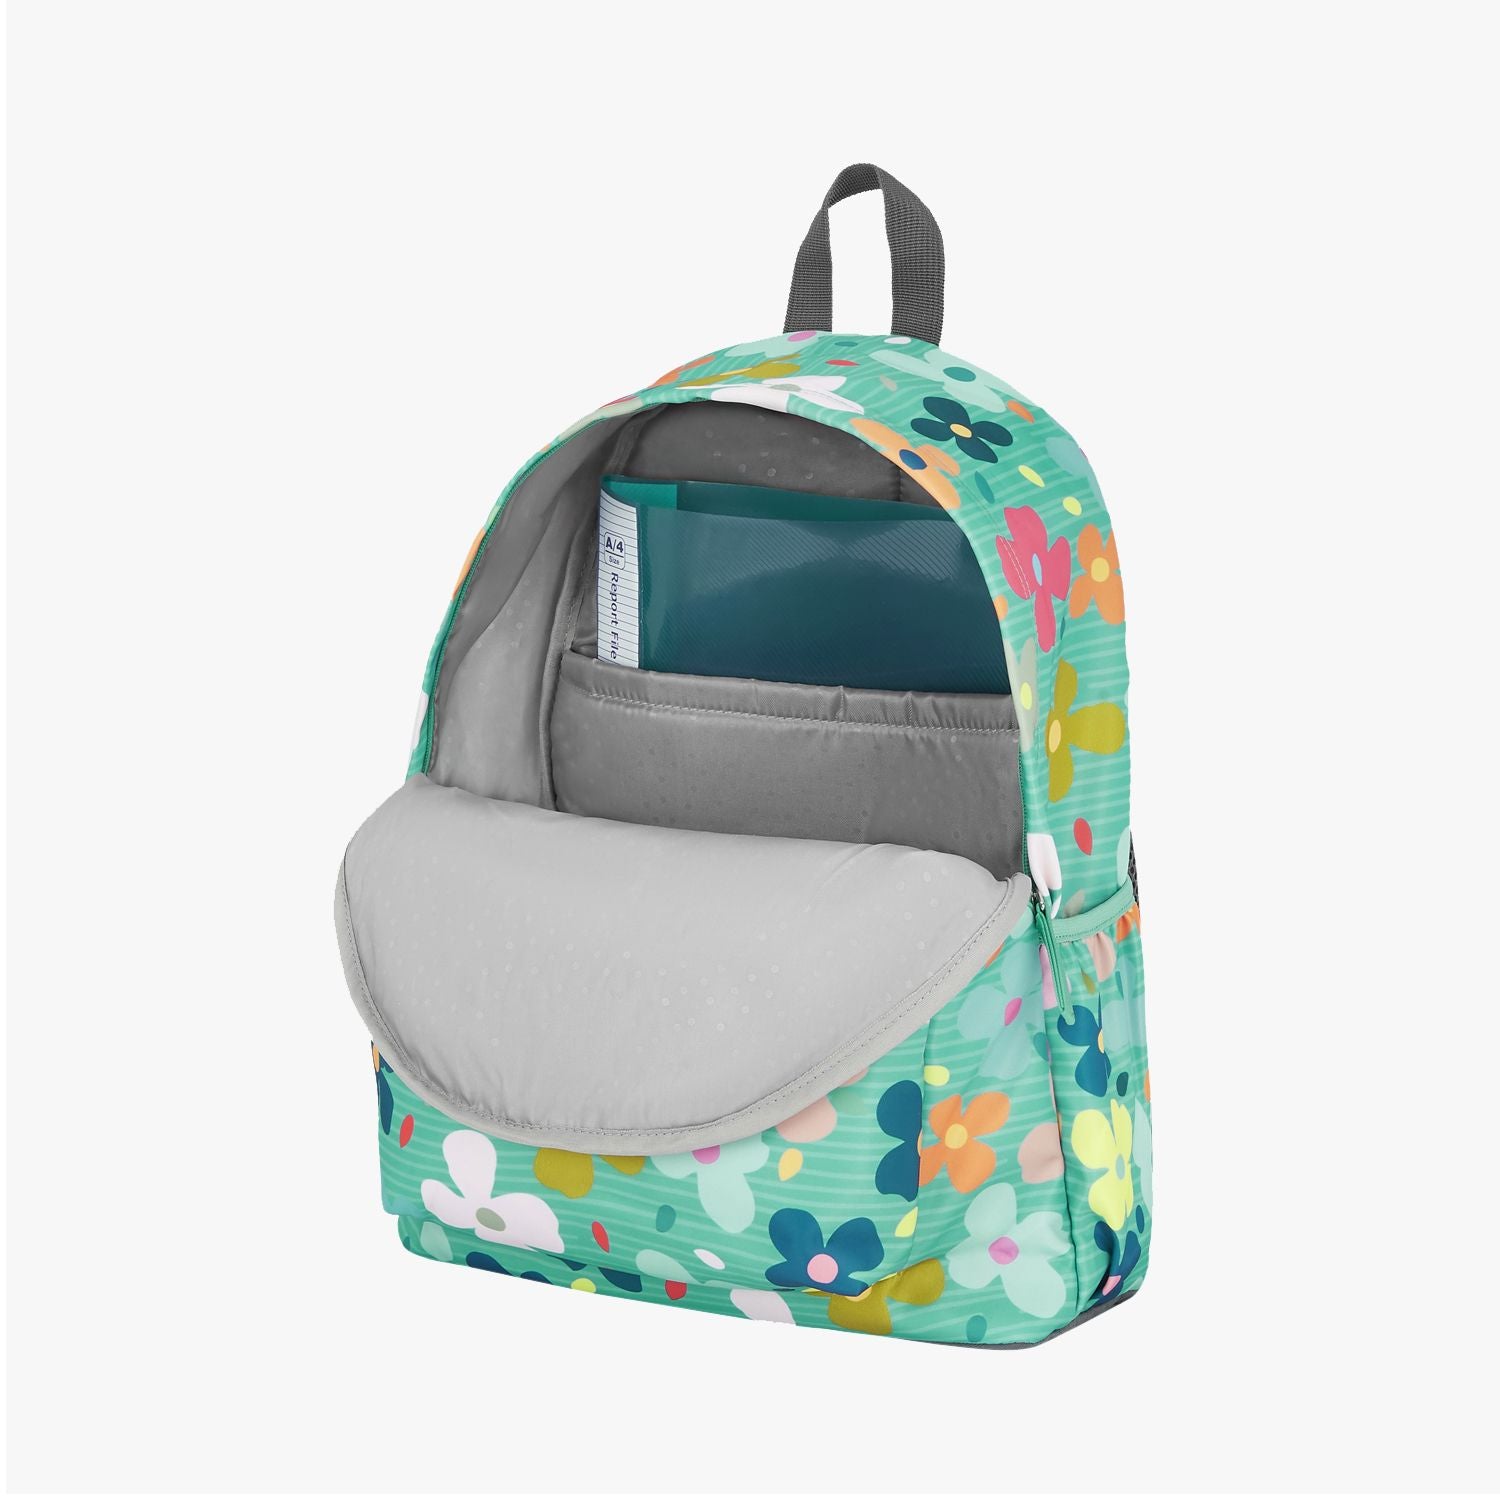 Flower Power Casual Backpack - Green